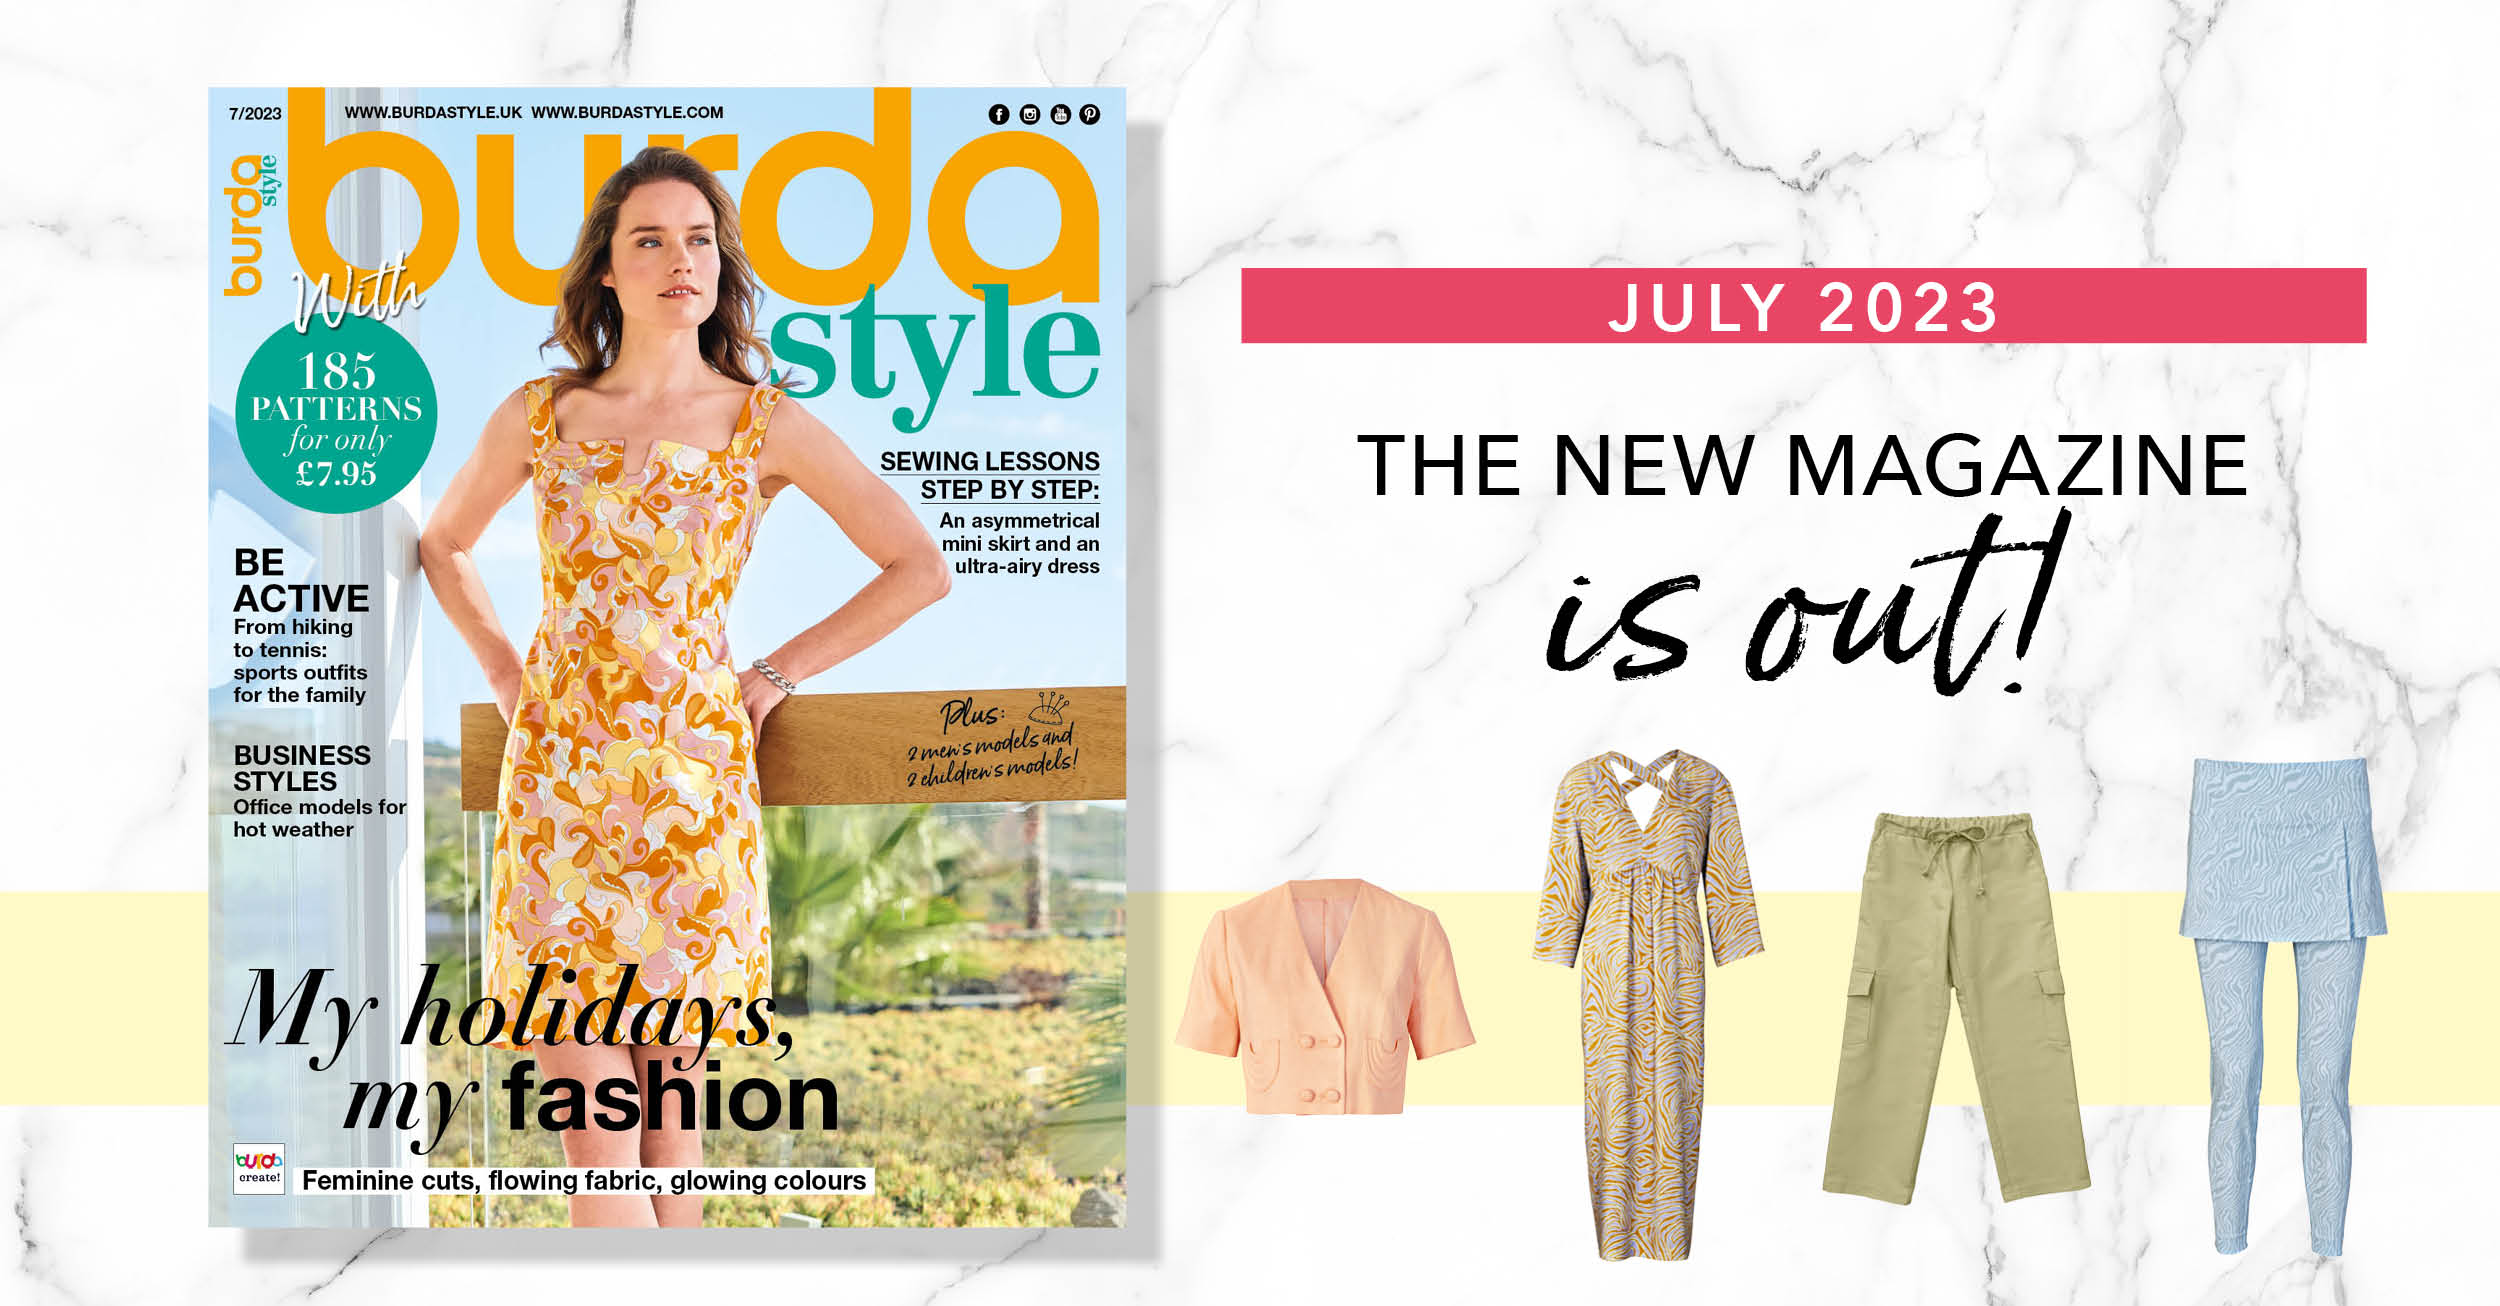 July 2023 : The New Issue of Burda Style!